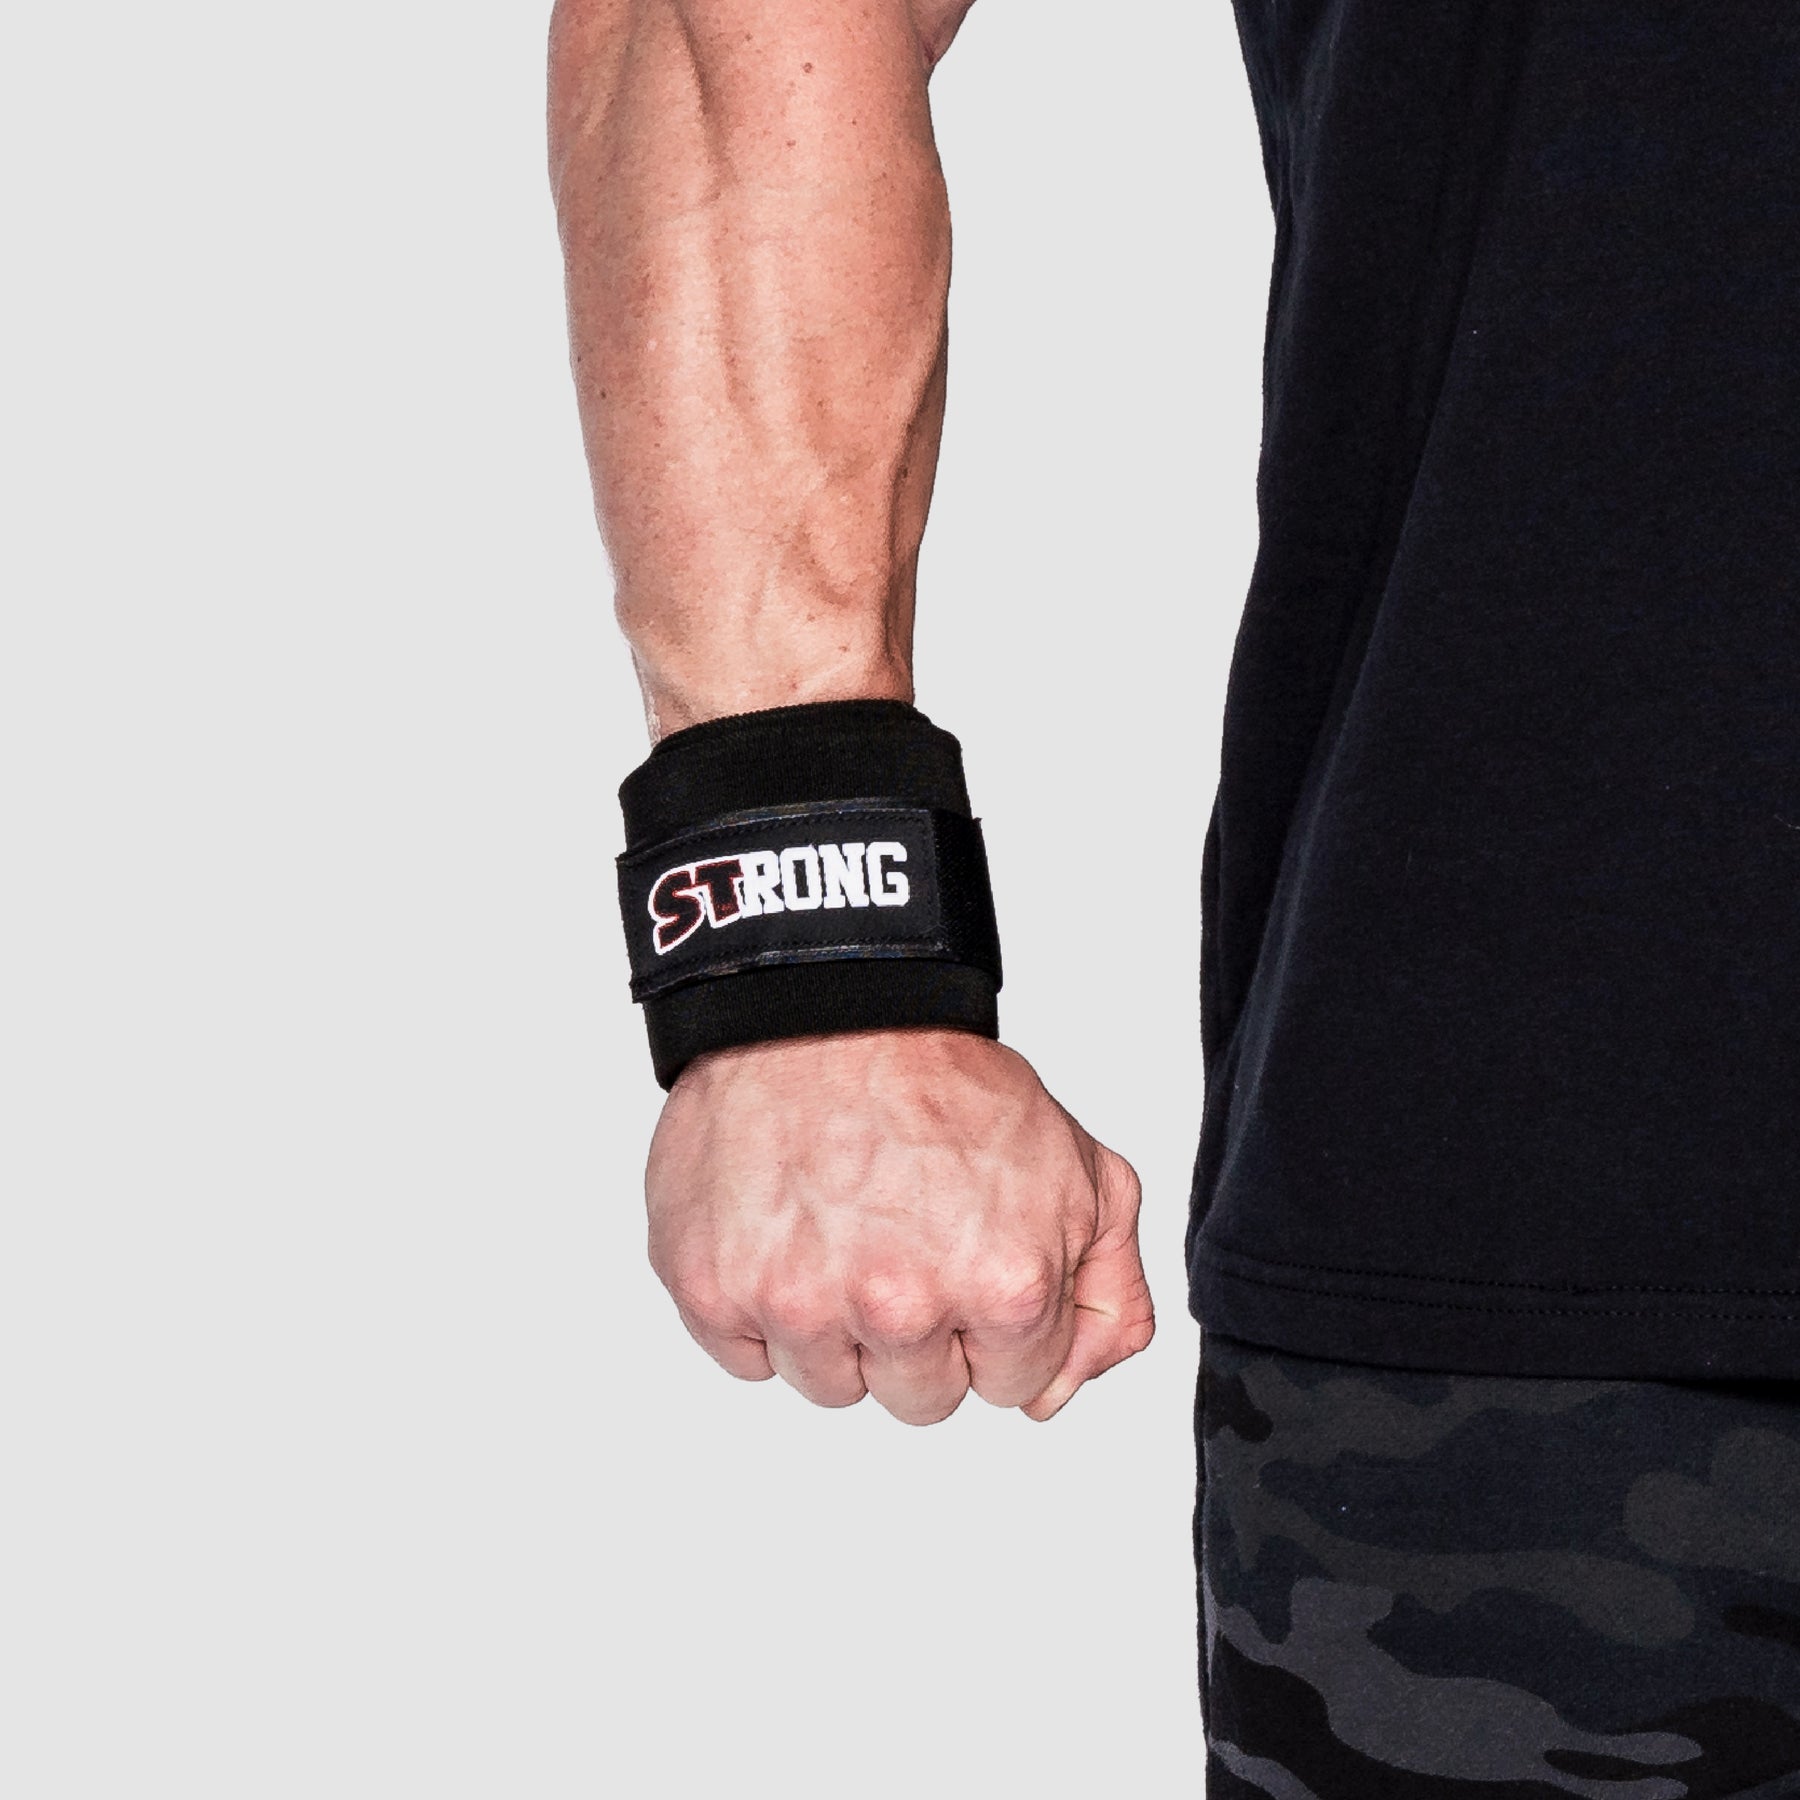 Hustle Lifting Straps Gym Wrist Wraps - The Best 24 Cotton Wrist Straps  for Weightlifting to Support